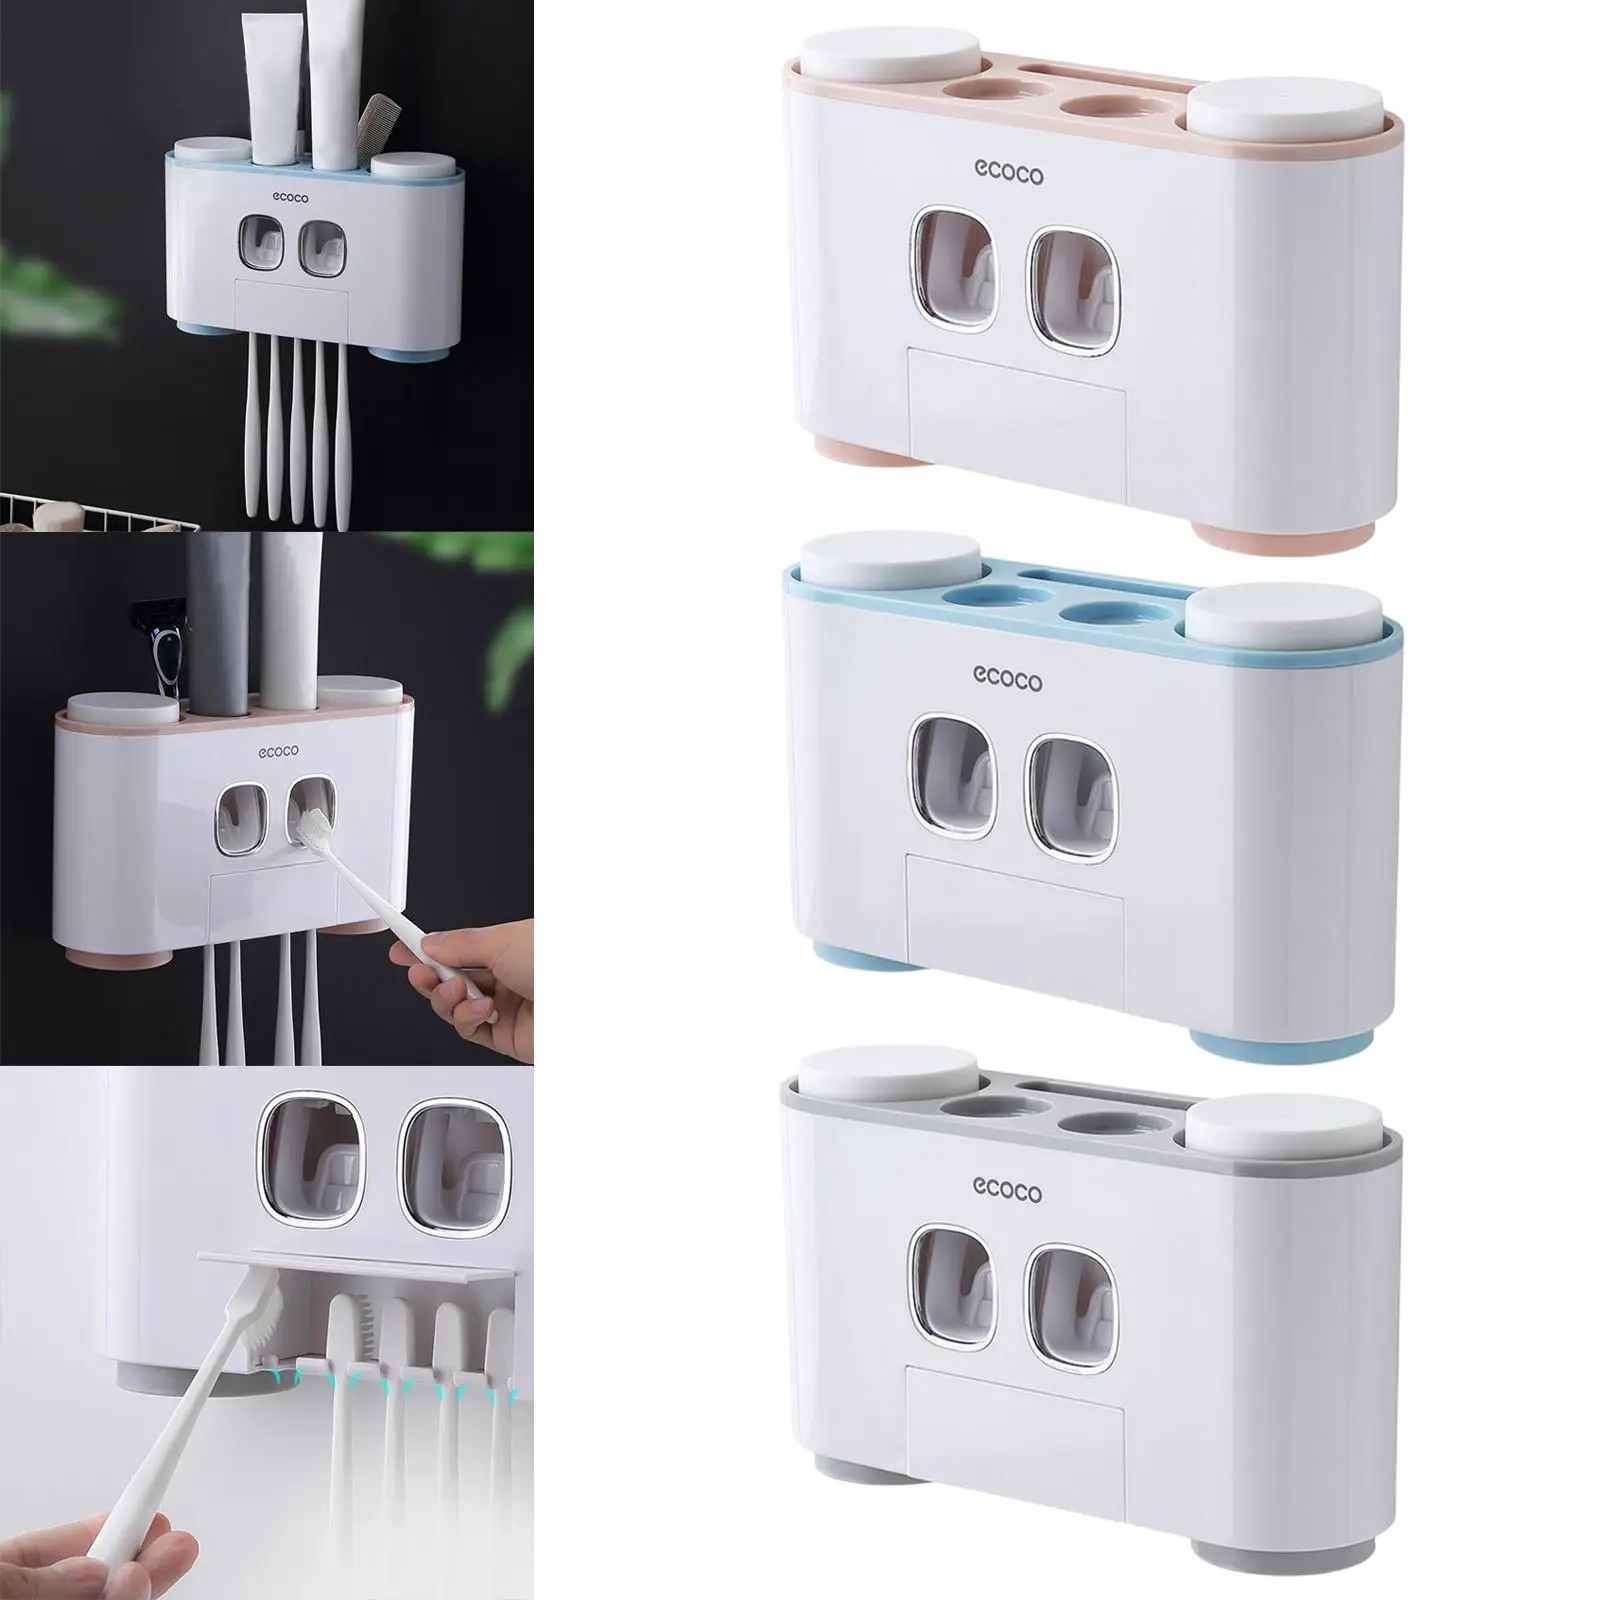 Automatic Electric Tooth Pastetooth Dispenser Squeezer with Magnetic Cup and Toothbrush Organizer Slots Toothbrush Holder